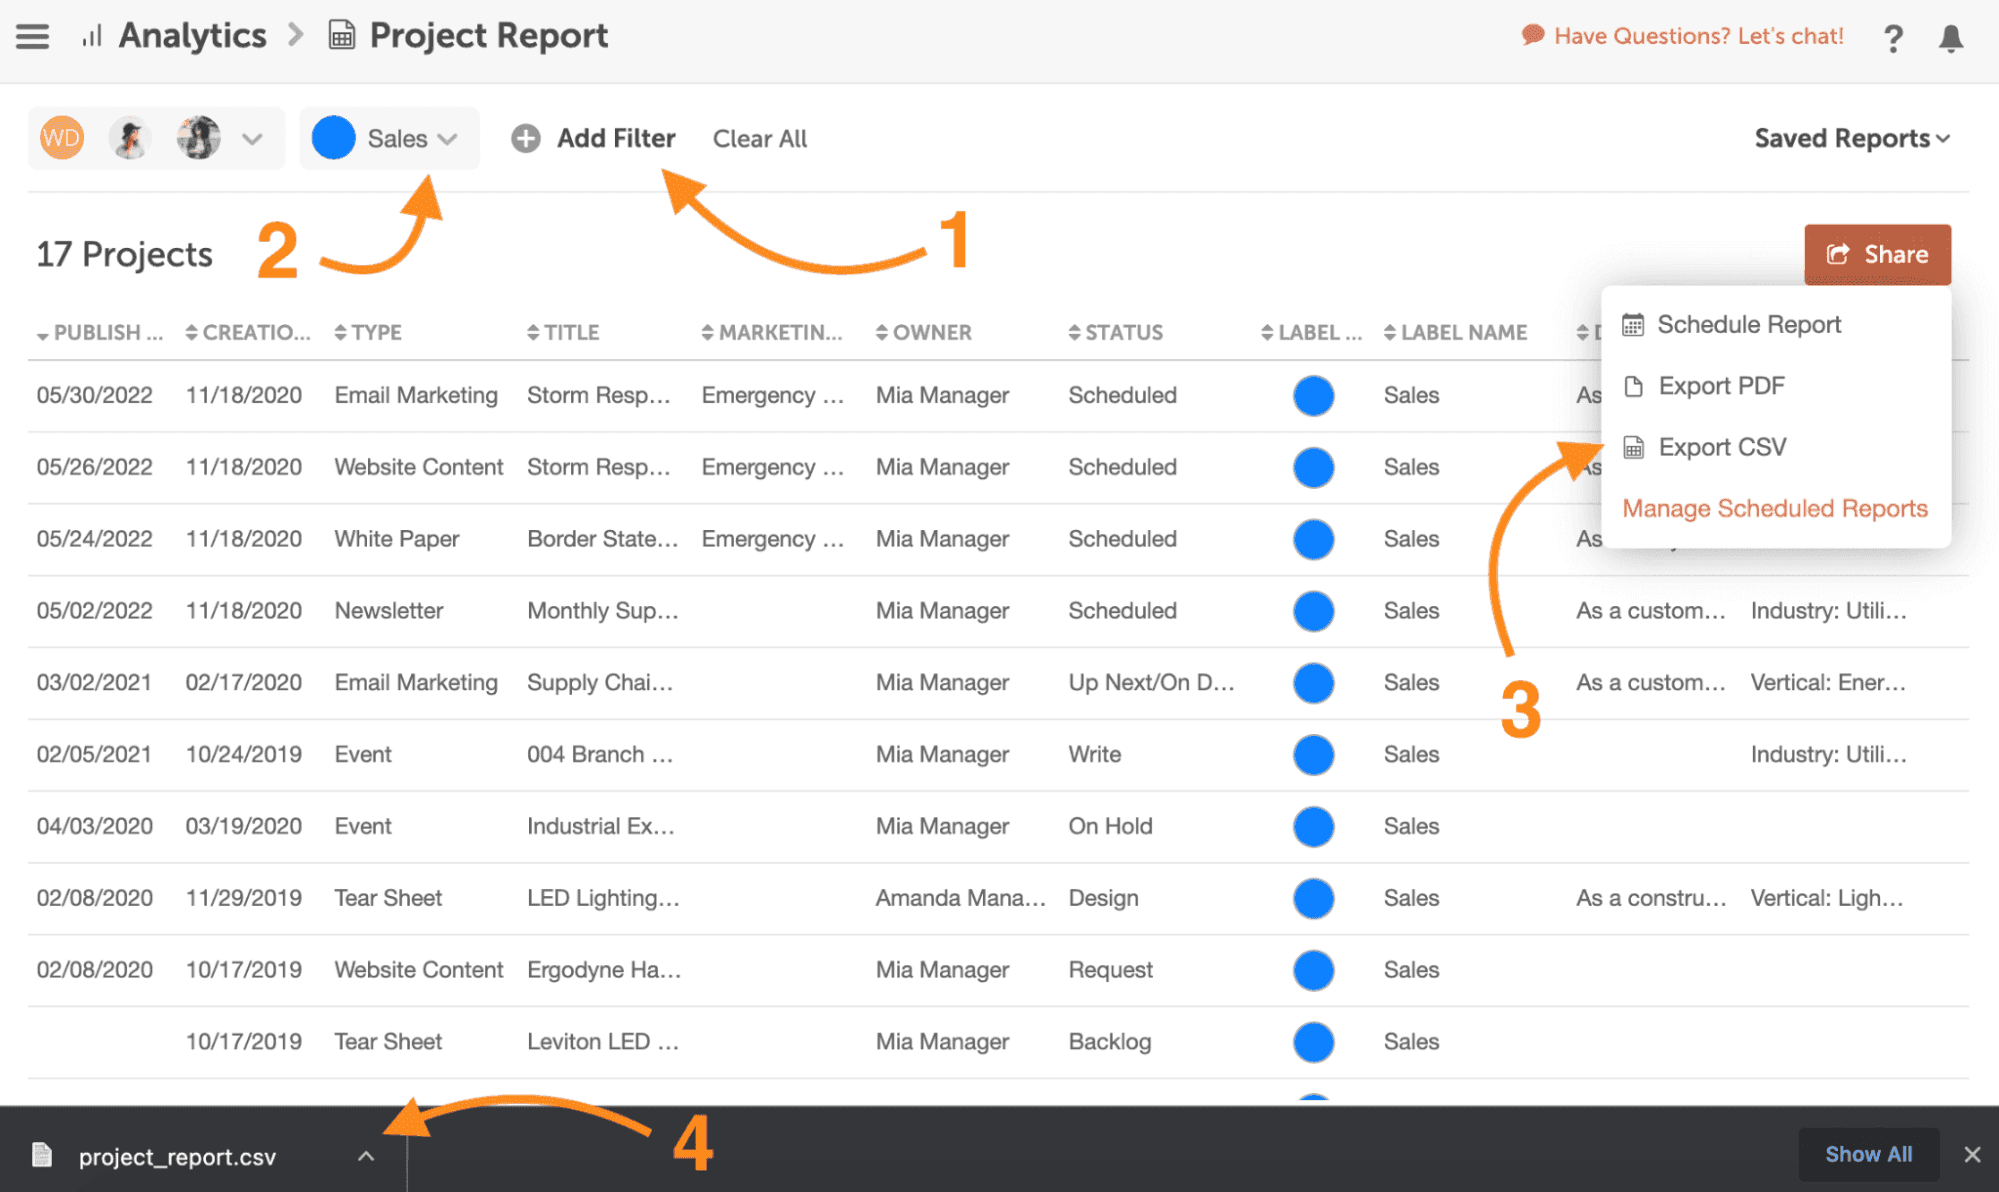 Use project report to export activities.